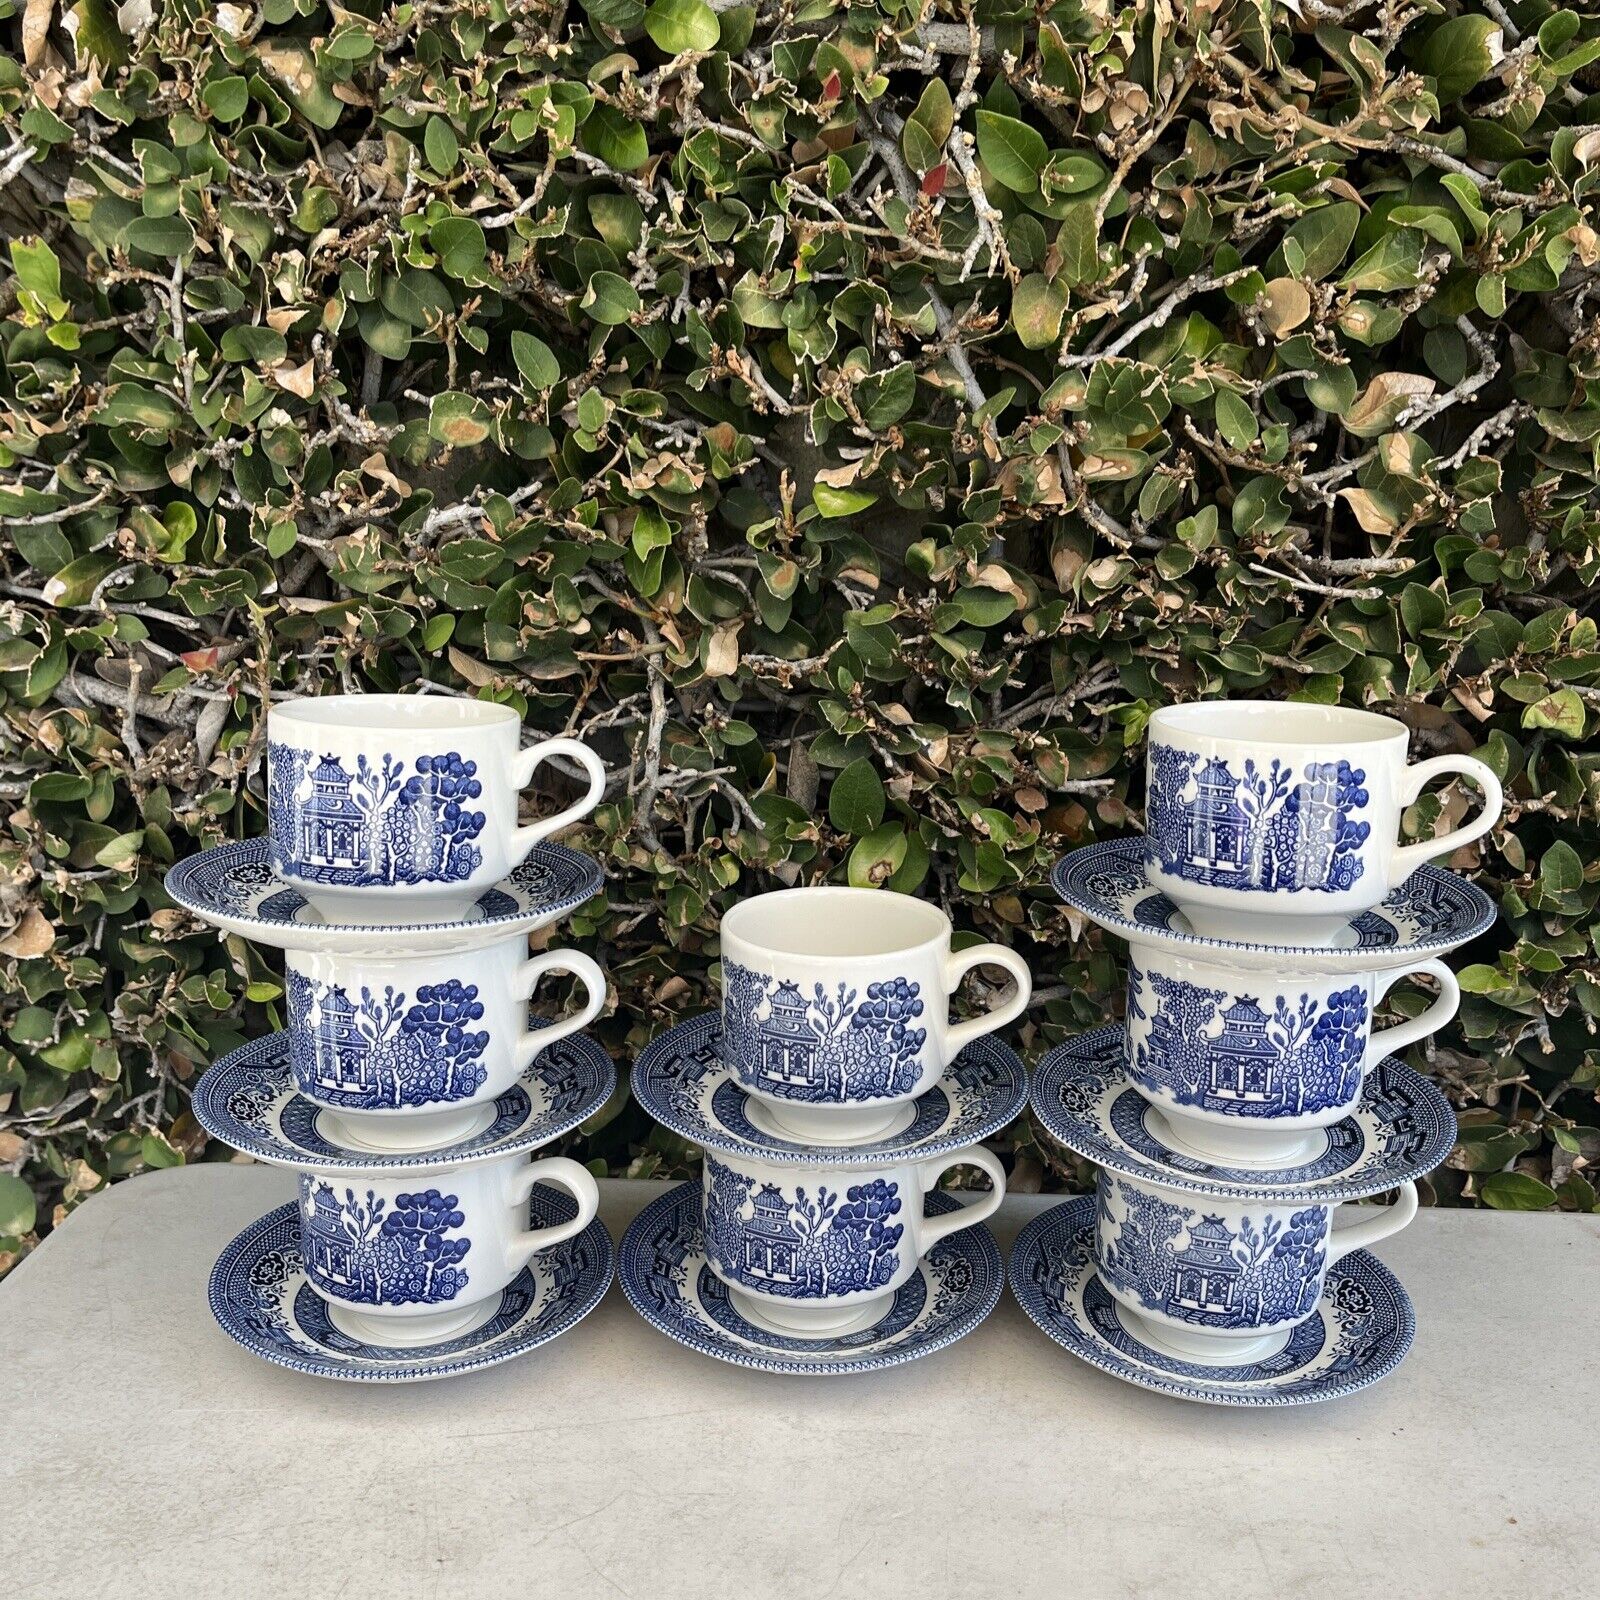 VTG Churchill Blue Willow Tea Cups and Saucers-England-Set of 8